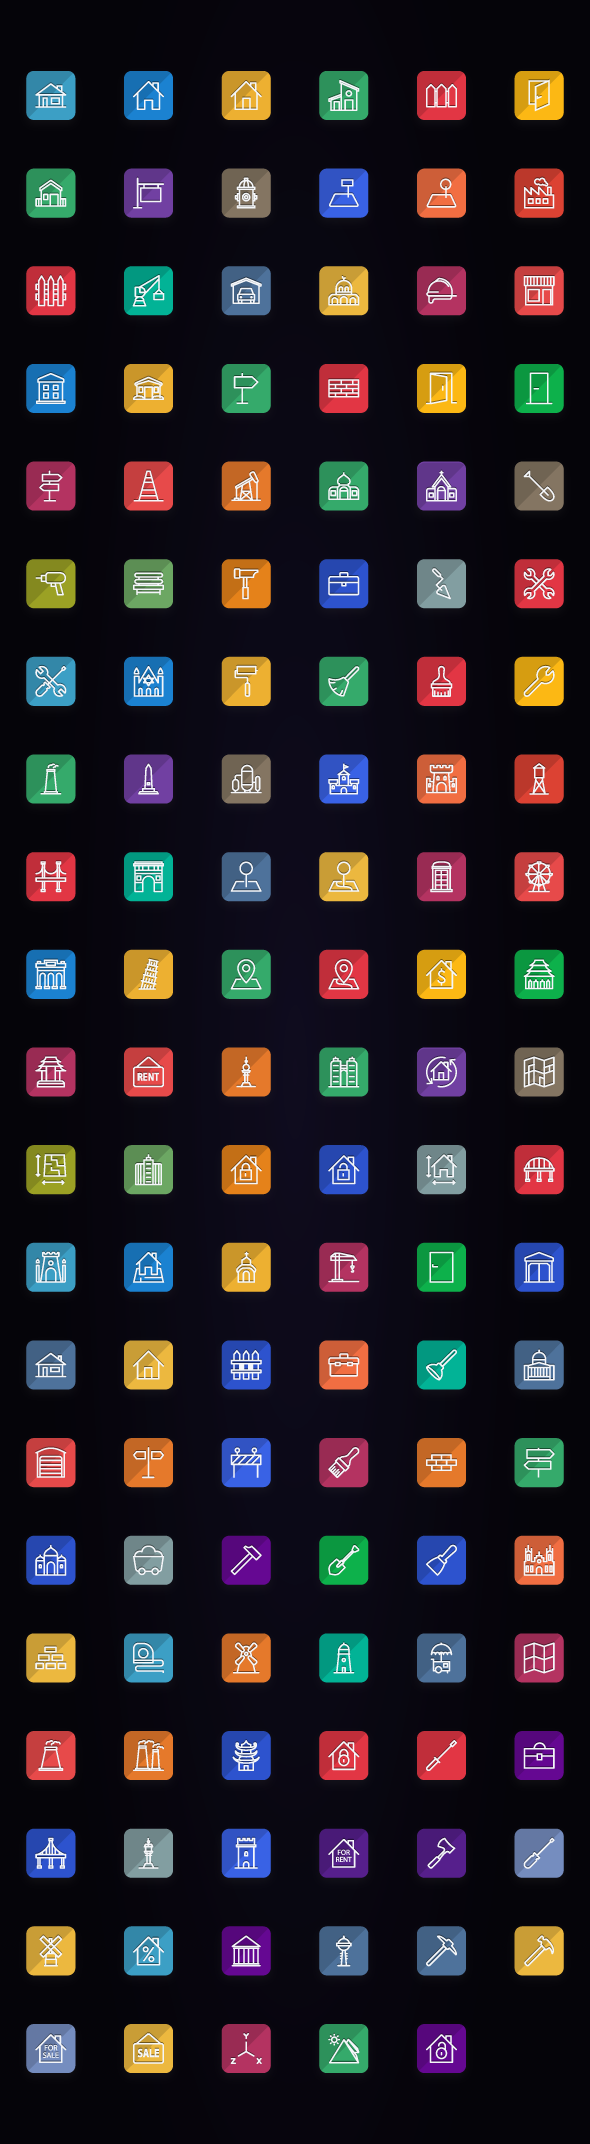 flat icons Icon line stroke outline app android ios9 design free icons material vector Pack Web